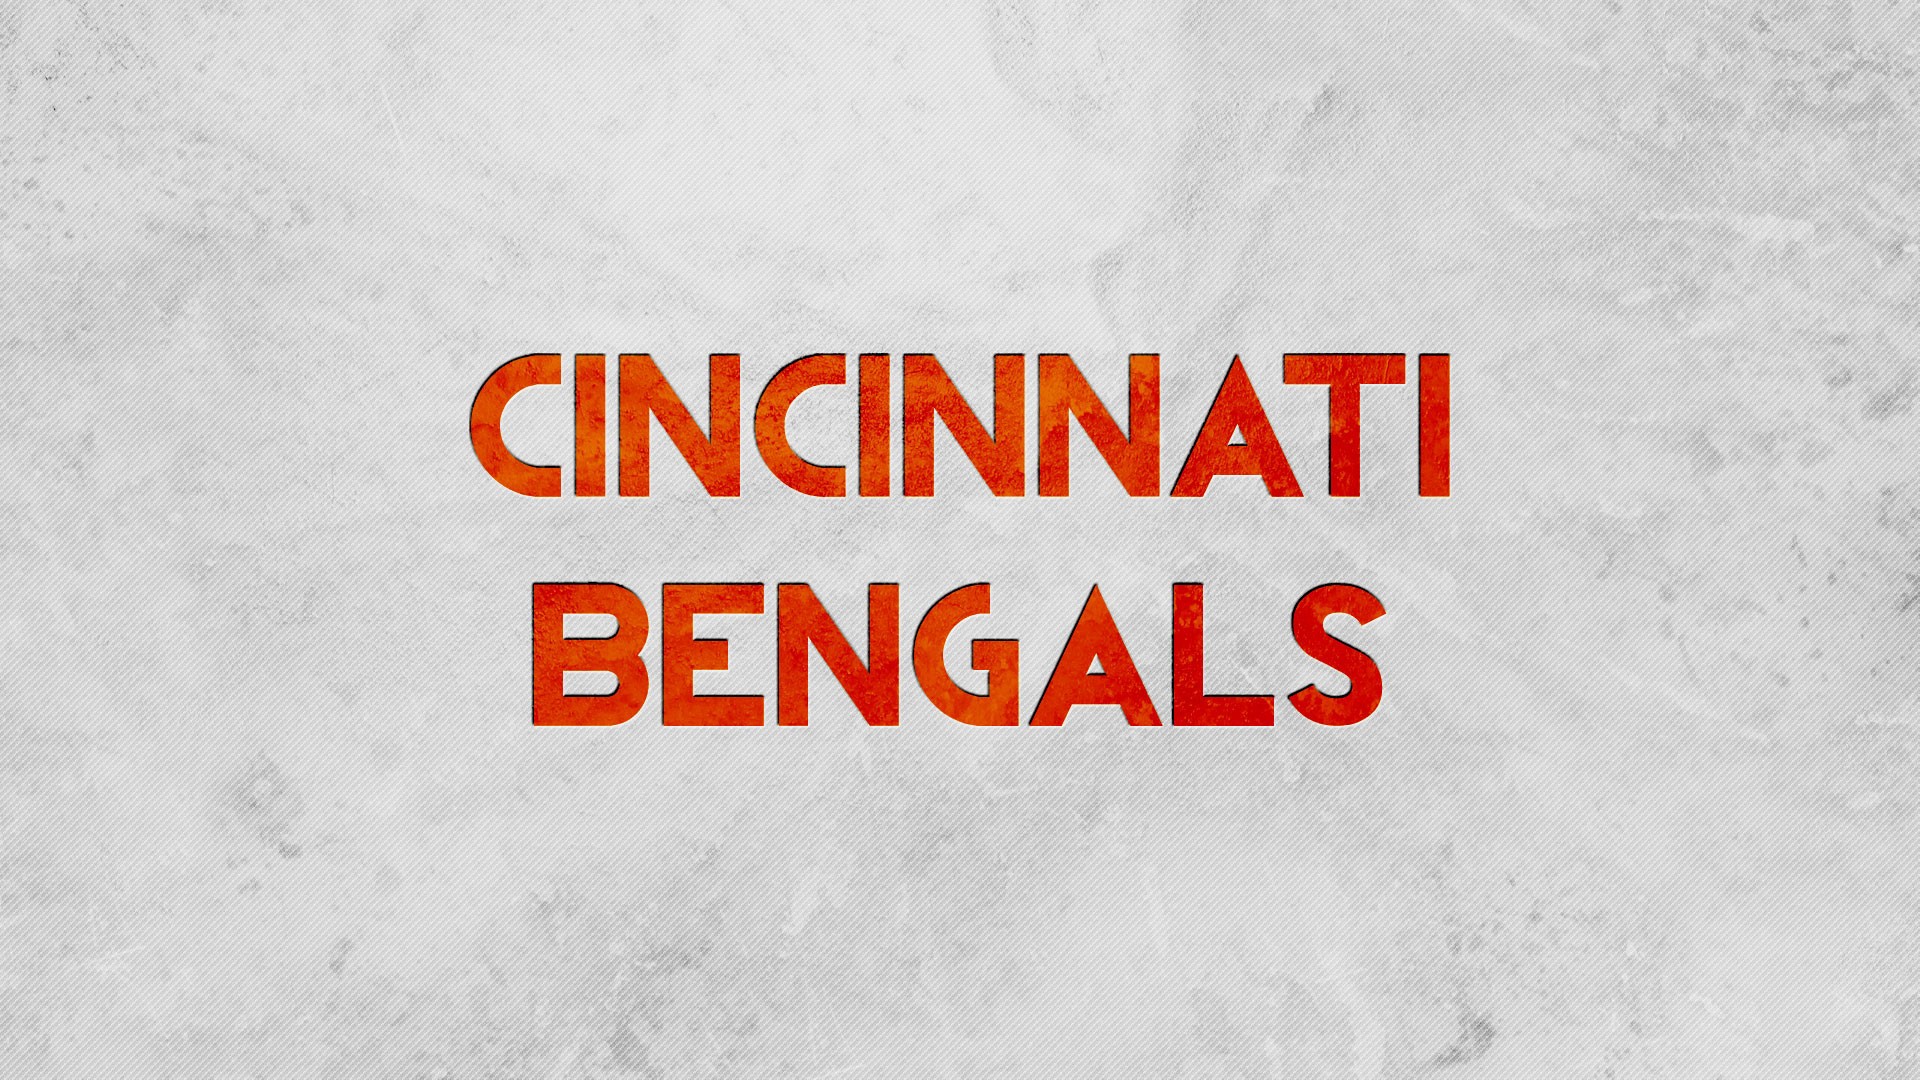 Cincinnati Bengals Wallpaper For Mac OS With high-resolution 1920X1080 pixel. Download and set as wallpaper for Desktop Computer, Apple iPhone X, XS Max, XR, 8, 7, 6, SE, iPad, Android